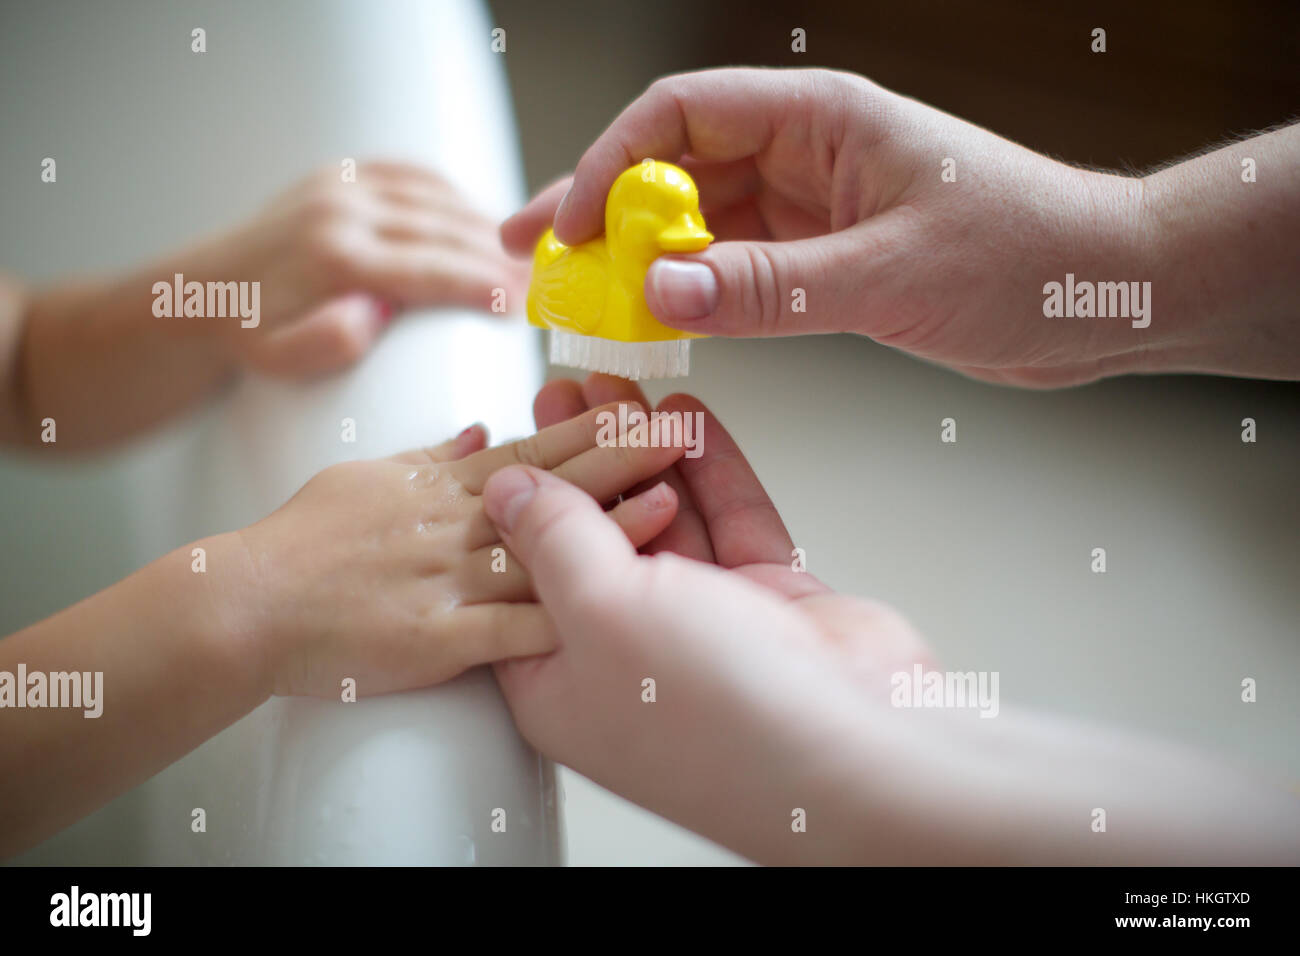 parent's hand cleaning kid's fingernail at the edge of bathtub. childhood, hands, nail brush, duck. Stock Photo